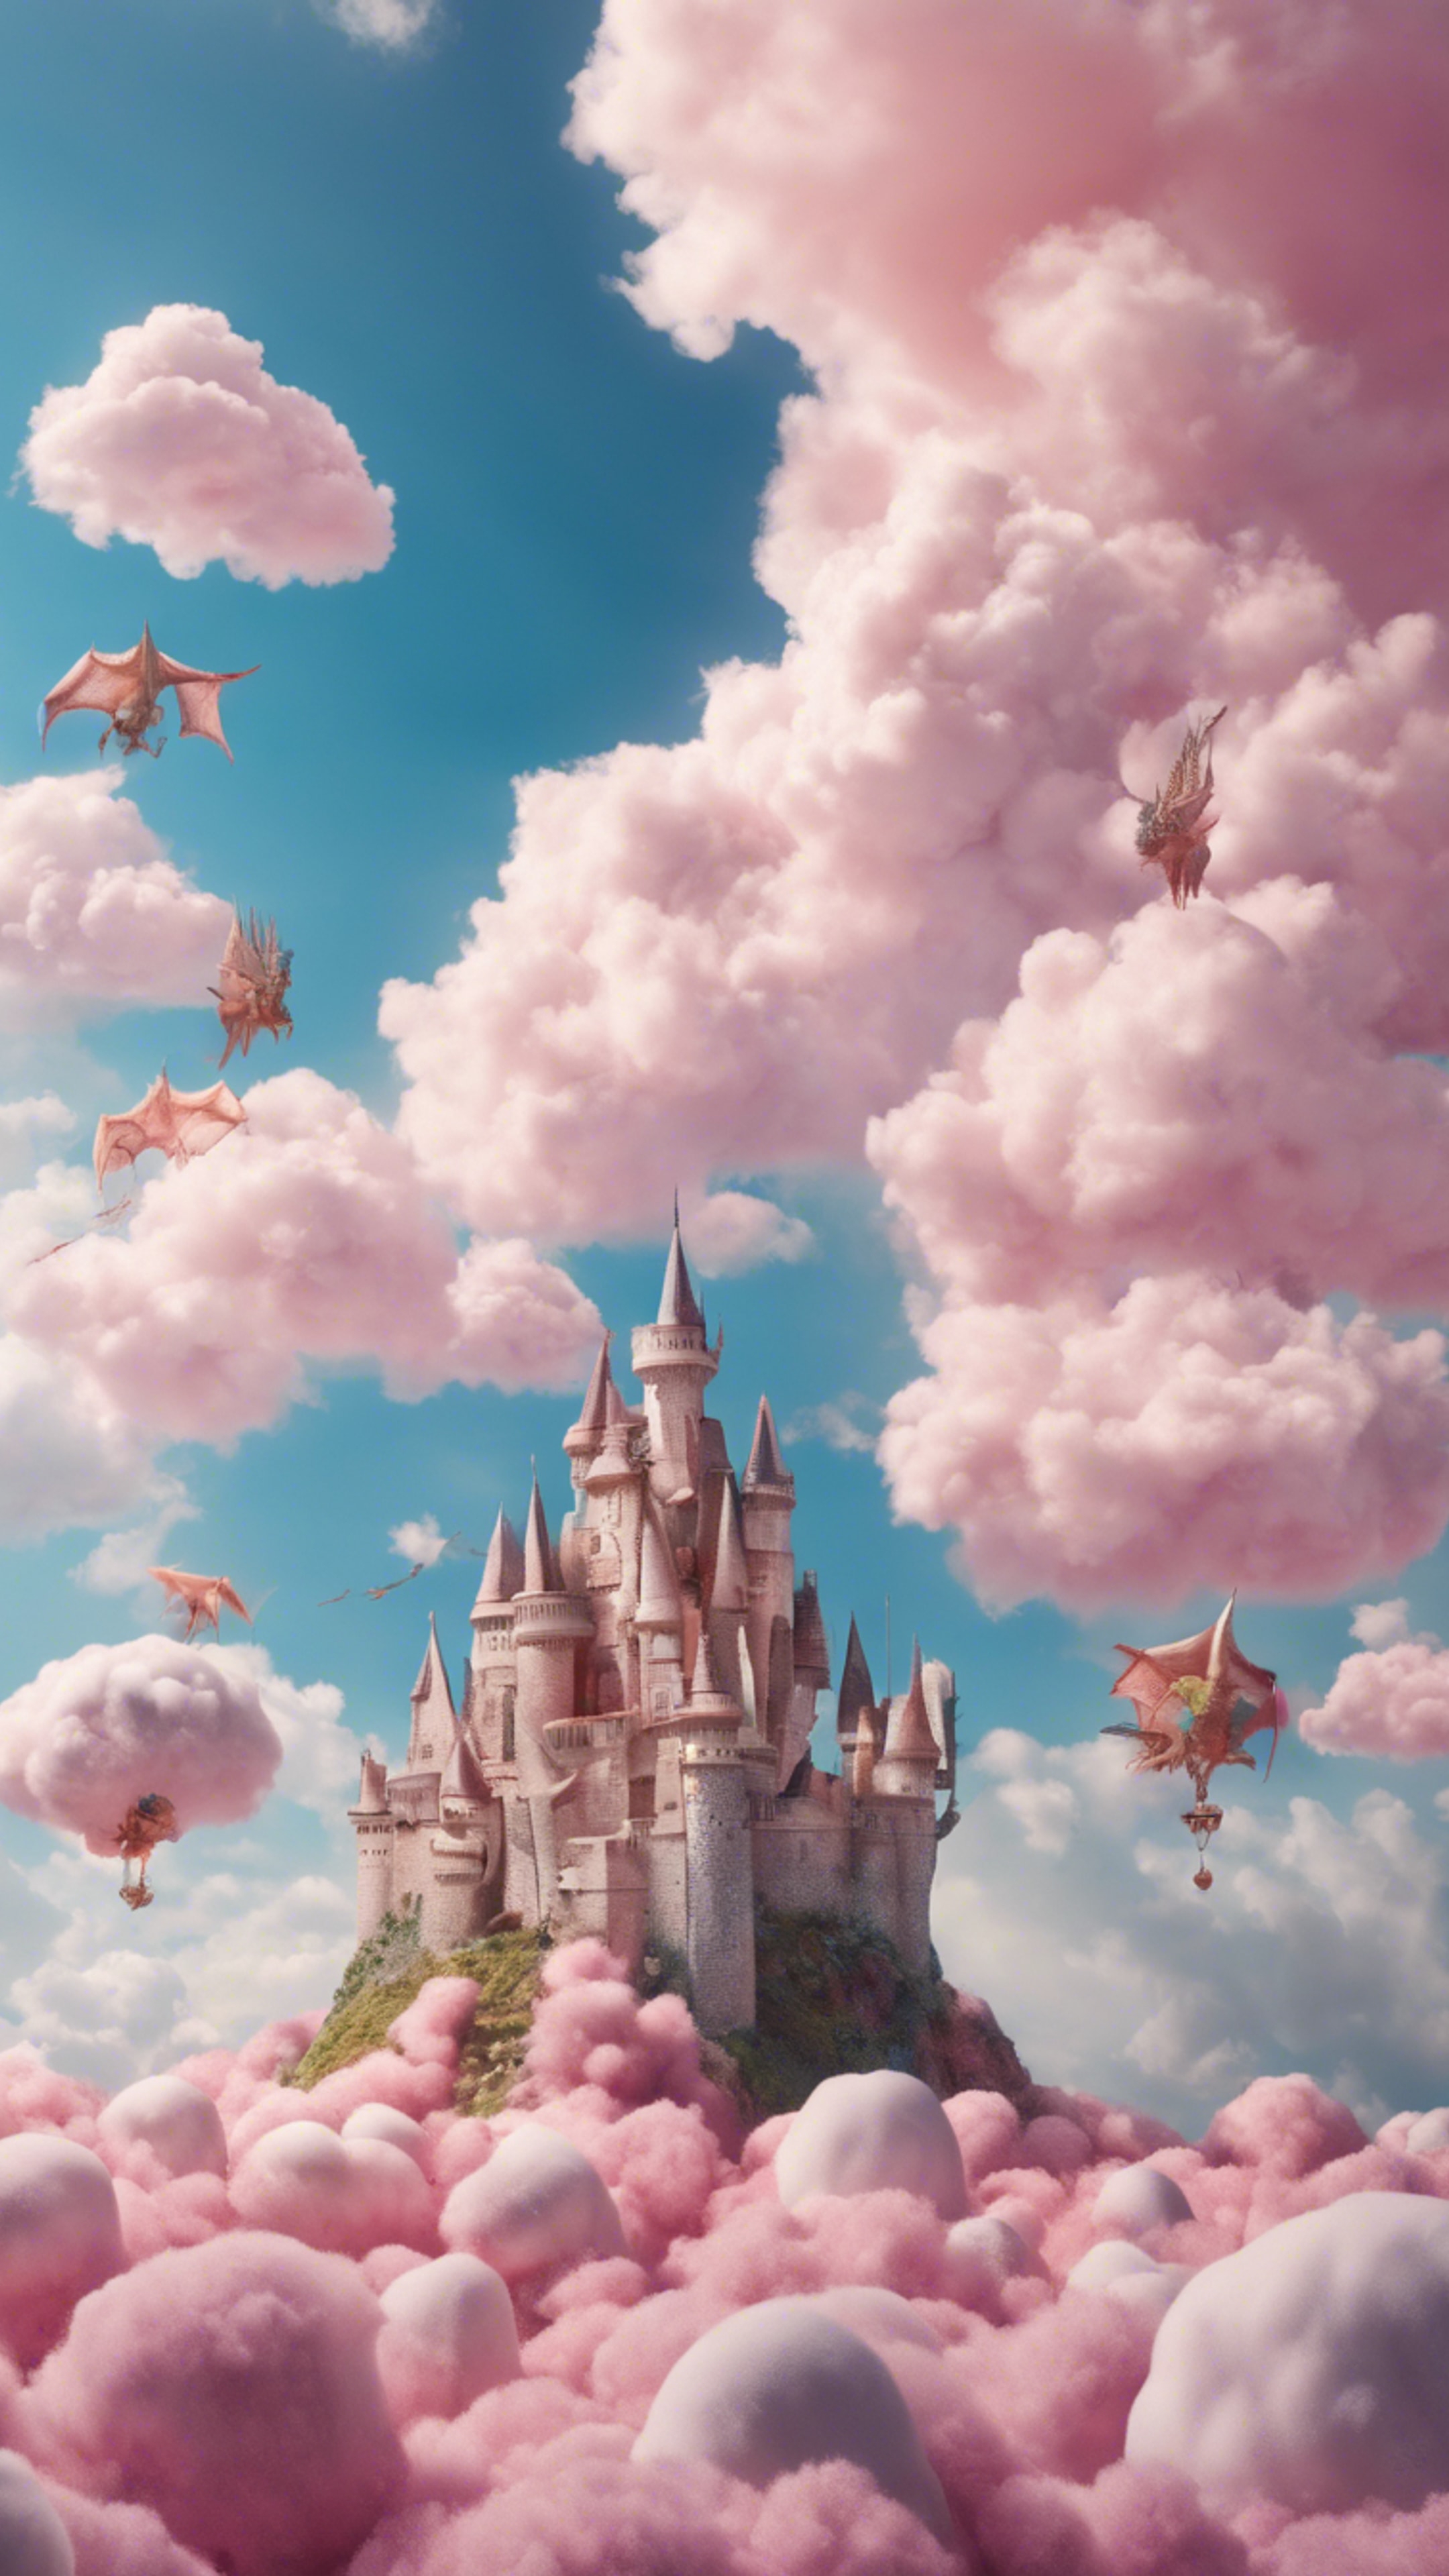 A castle floating in the sky above fluffy, cotton-candy-like clouds surrounded by a huddle of playful, magical dragons. Шпалери[be63bba74c3941c98c10]